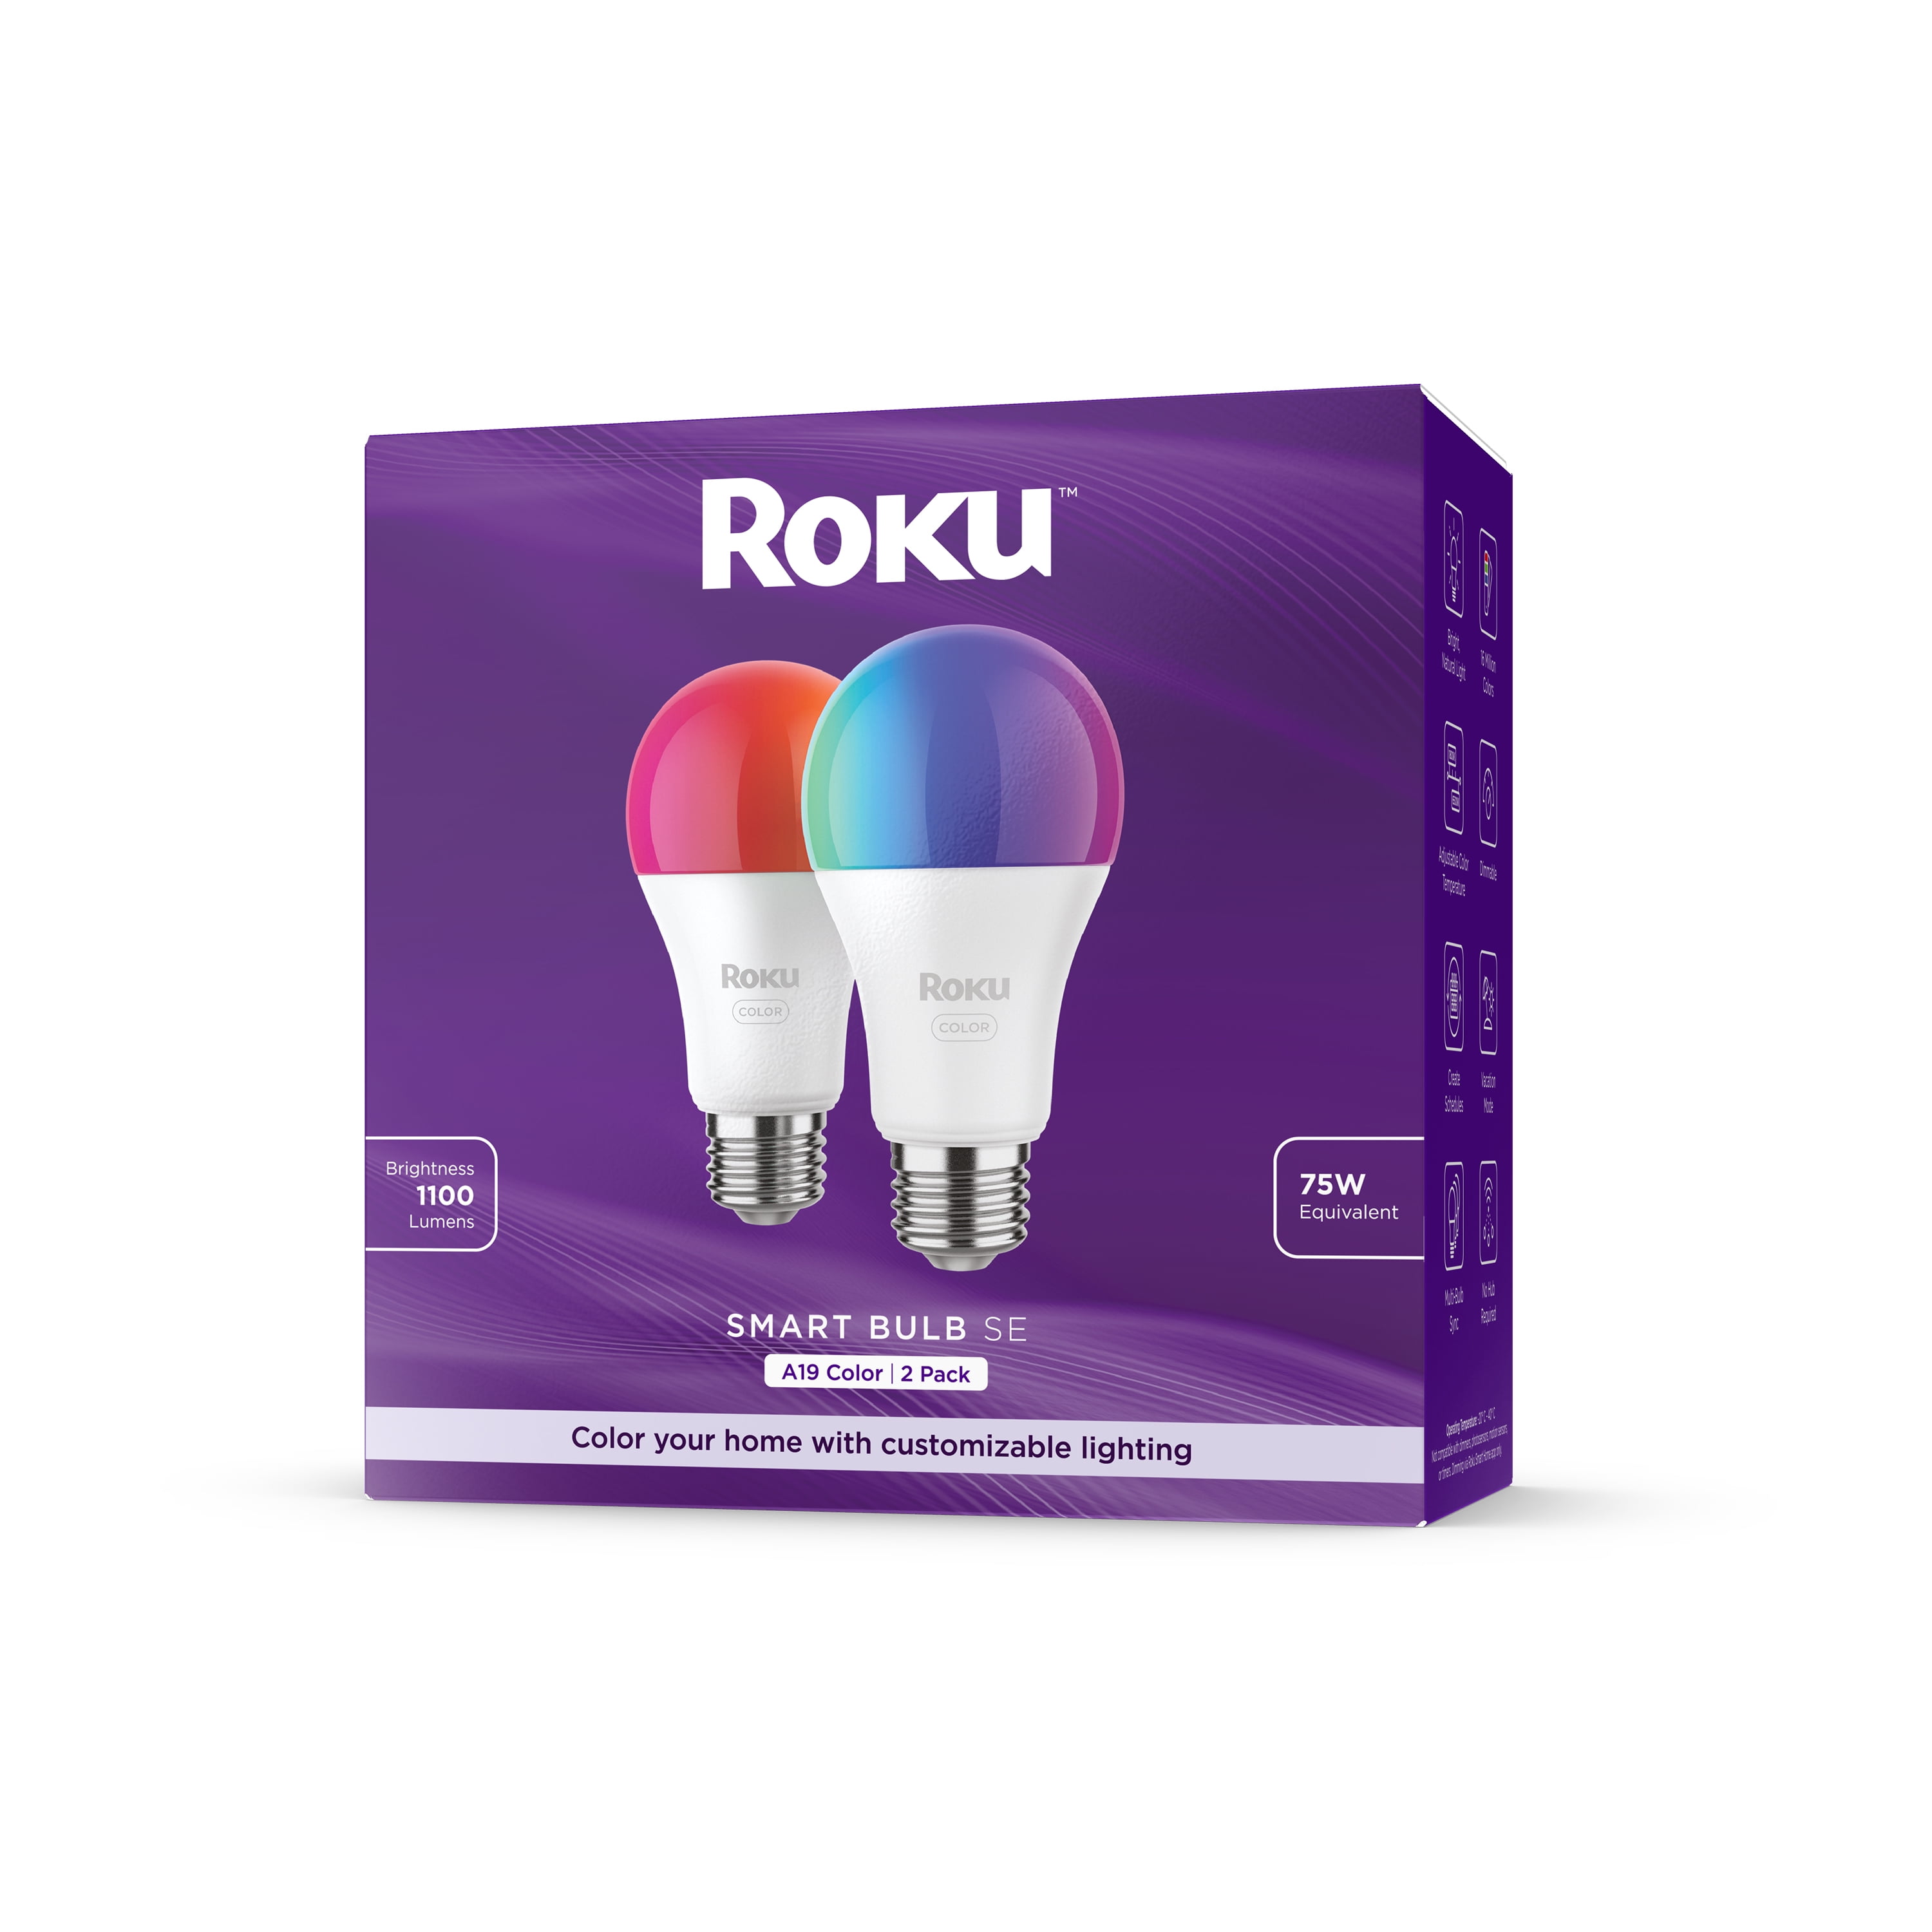 Roku Smart Home Smart Bulb SE (Color) 2-Pack with 16 Million Color Options - 12 Watts